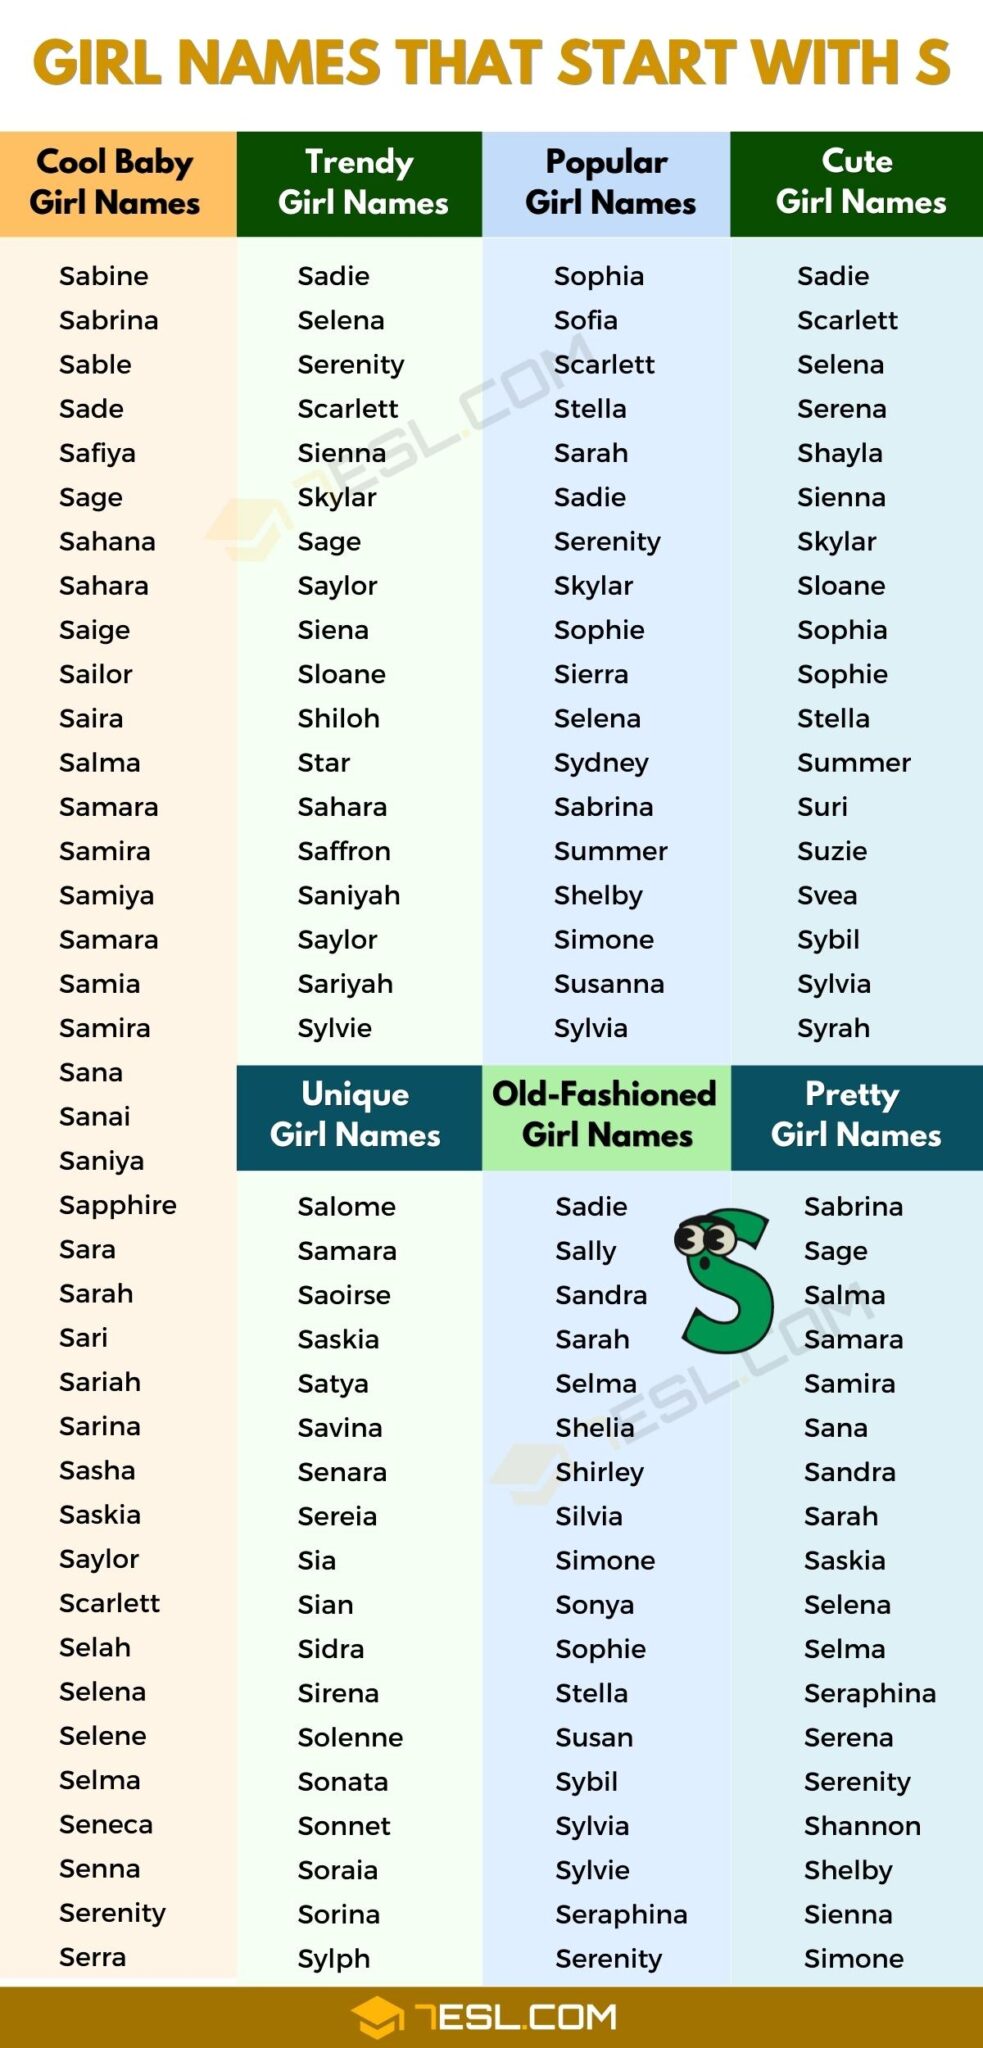 What Are Good Girl Names That Start With S